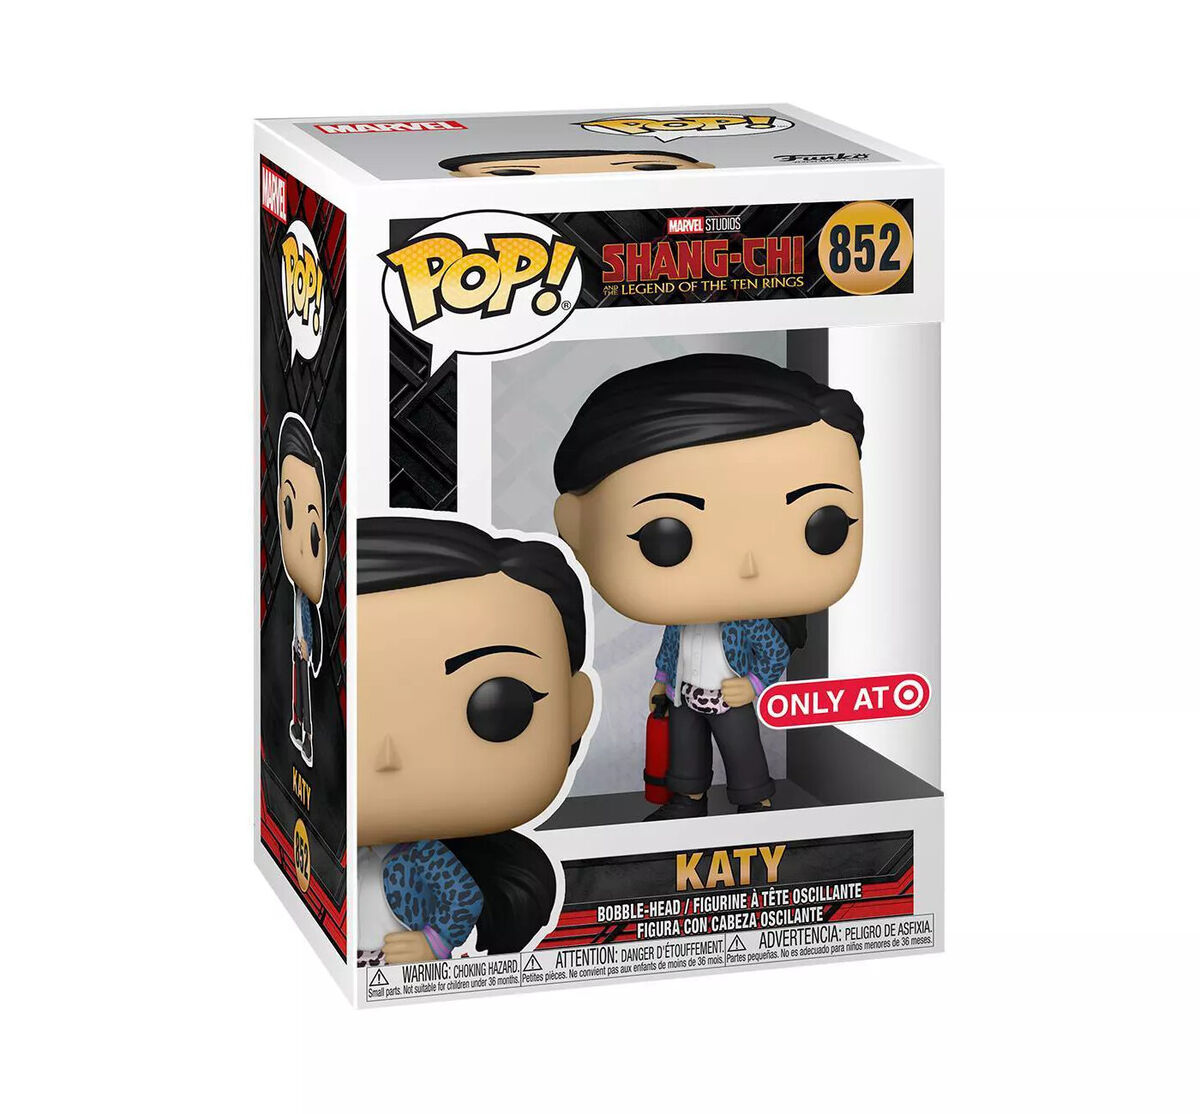 Funko - POP! - Marvel Studios - Shang-Chi and the Legend of the Ten Rings - Katy #852